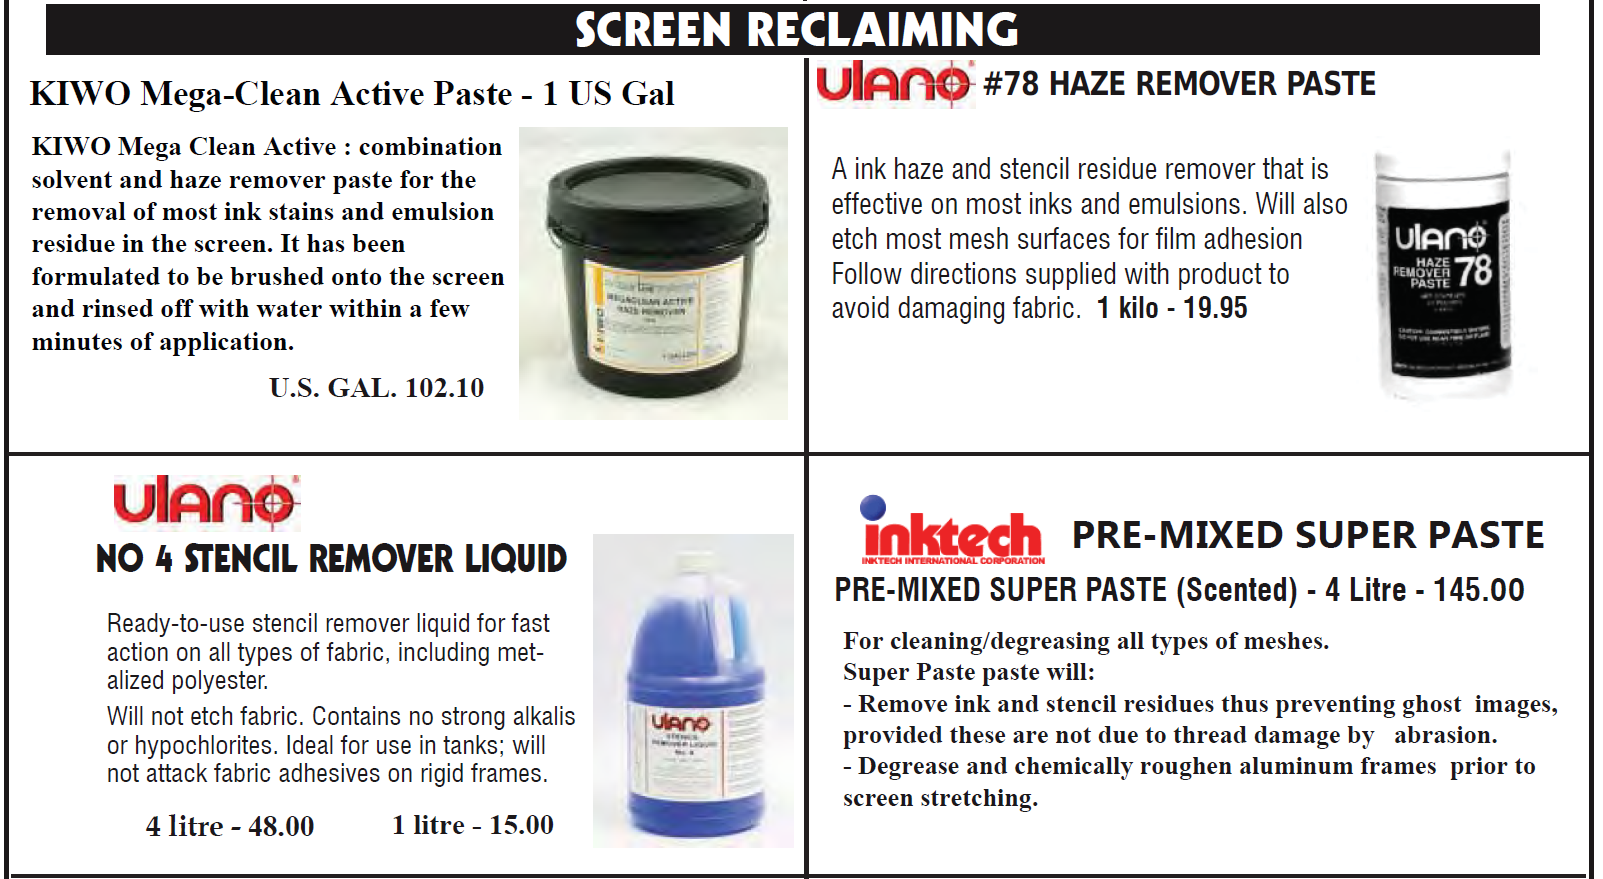 Screen reclaiming May 2022 - Screen Emulsion and Stencil Removers